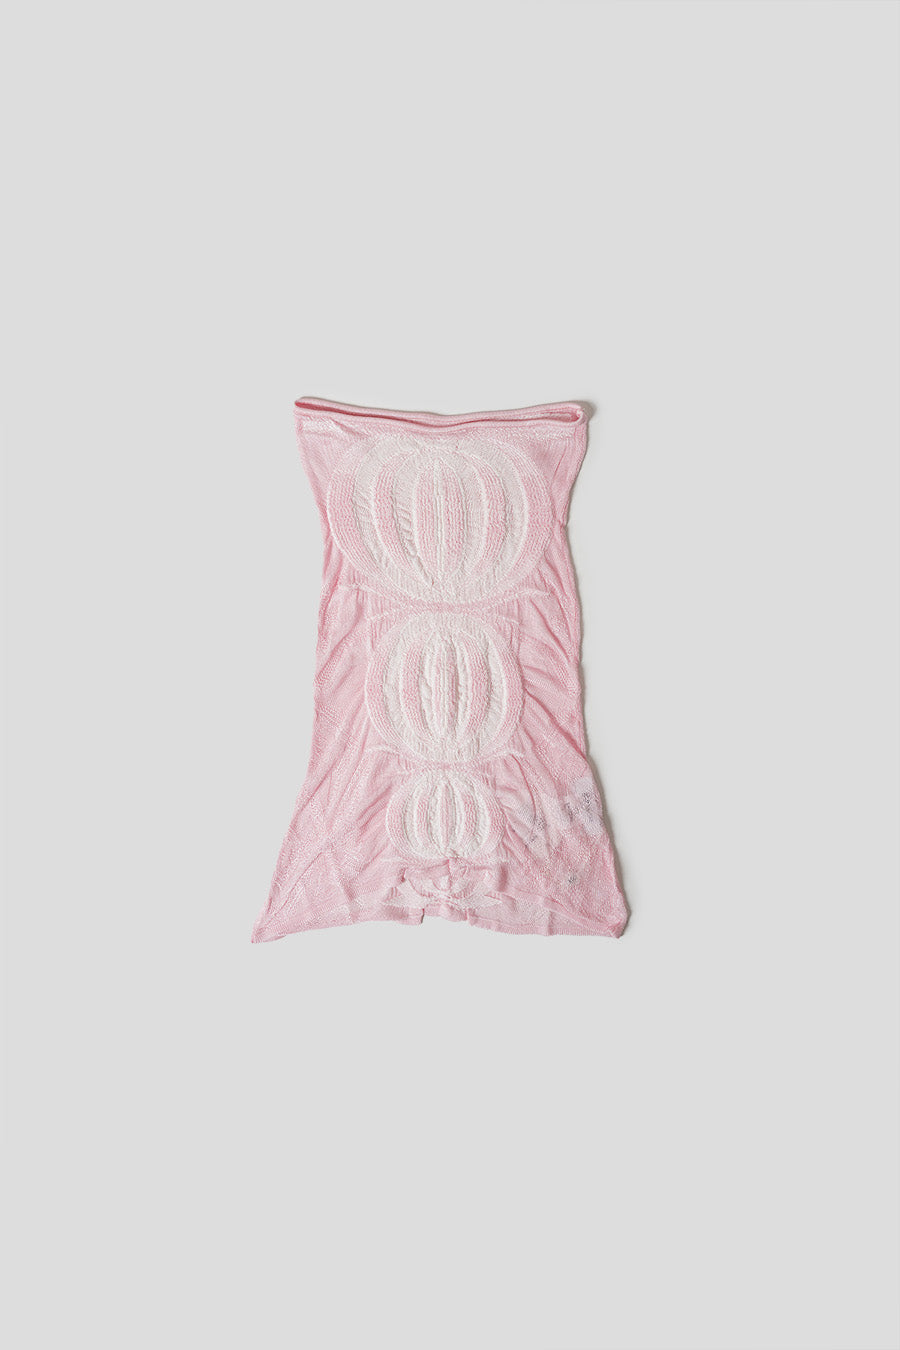 GIMAGUAS - PINK AND WHITE BAND TOP - LE LABO STORE